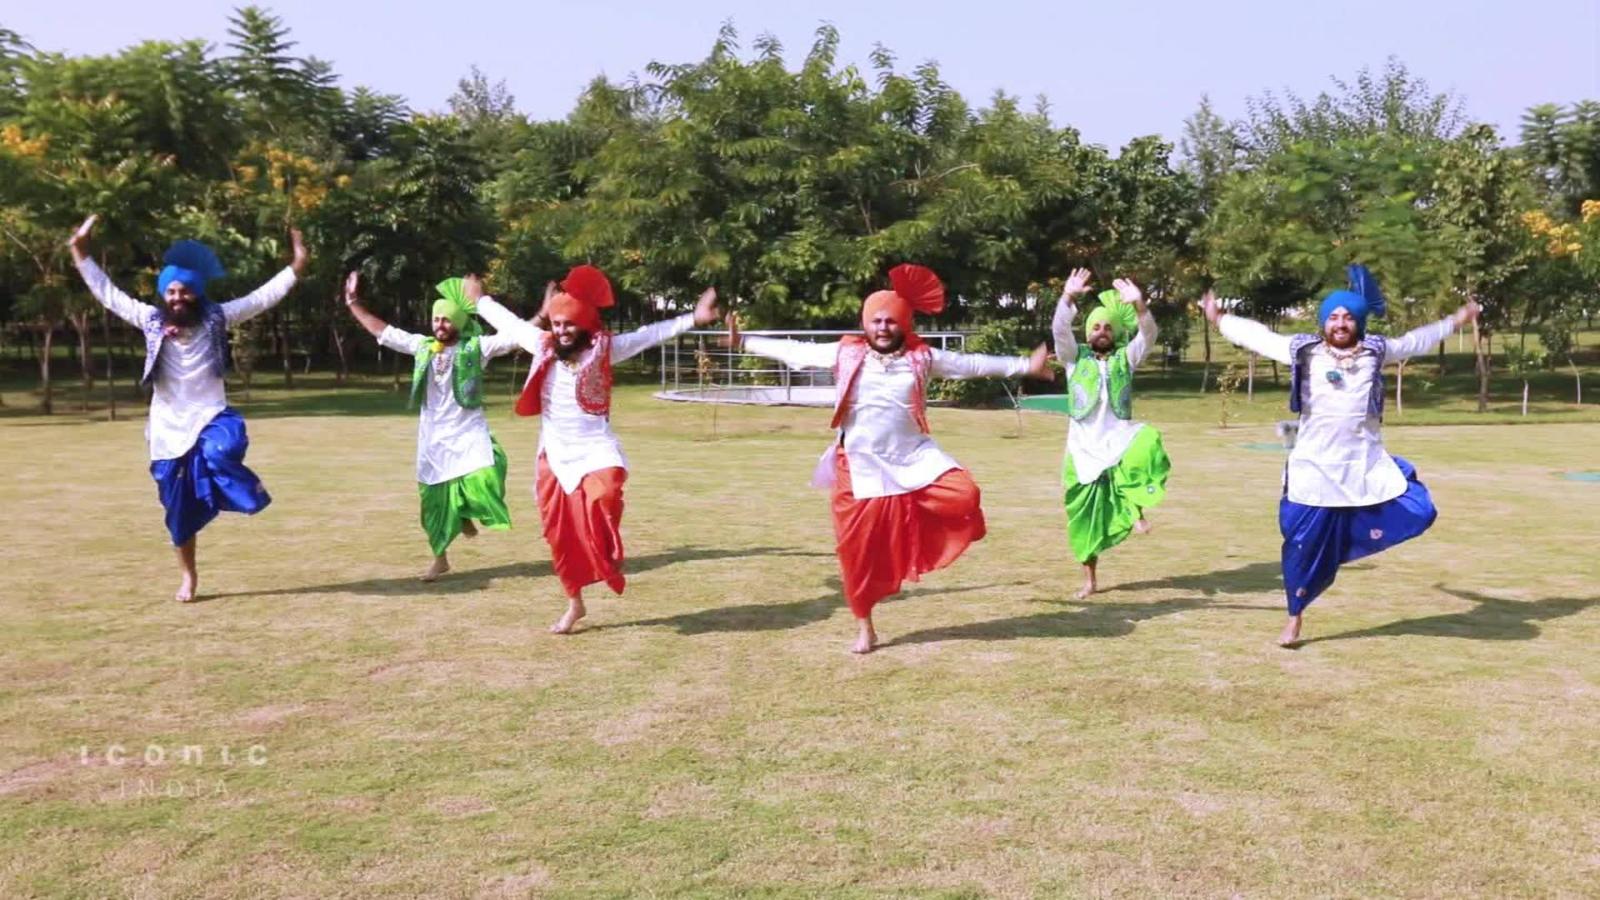 Bhangra One Of India S Most Energetic Dances Cnn Video